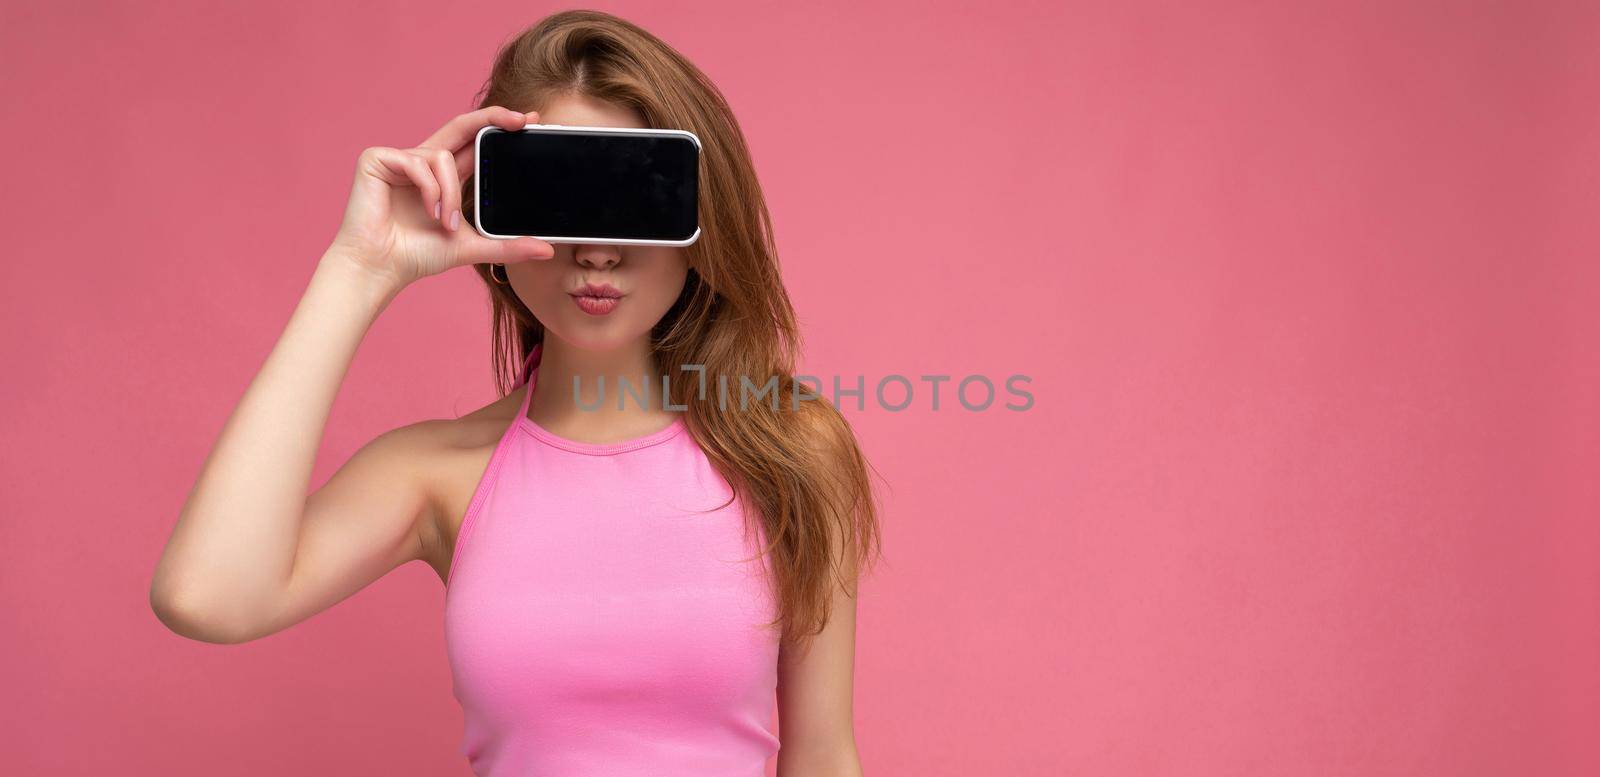 Photo of beautiful smiling young woman good looking wearing casual stylish outfit standing isolated on background with copy space holding smartphone showing phone in hand with empty screen display for mockup by TRMK